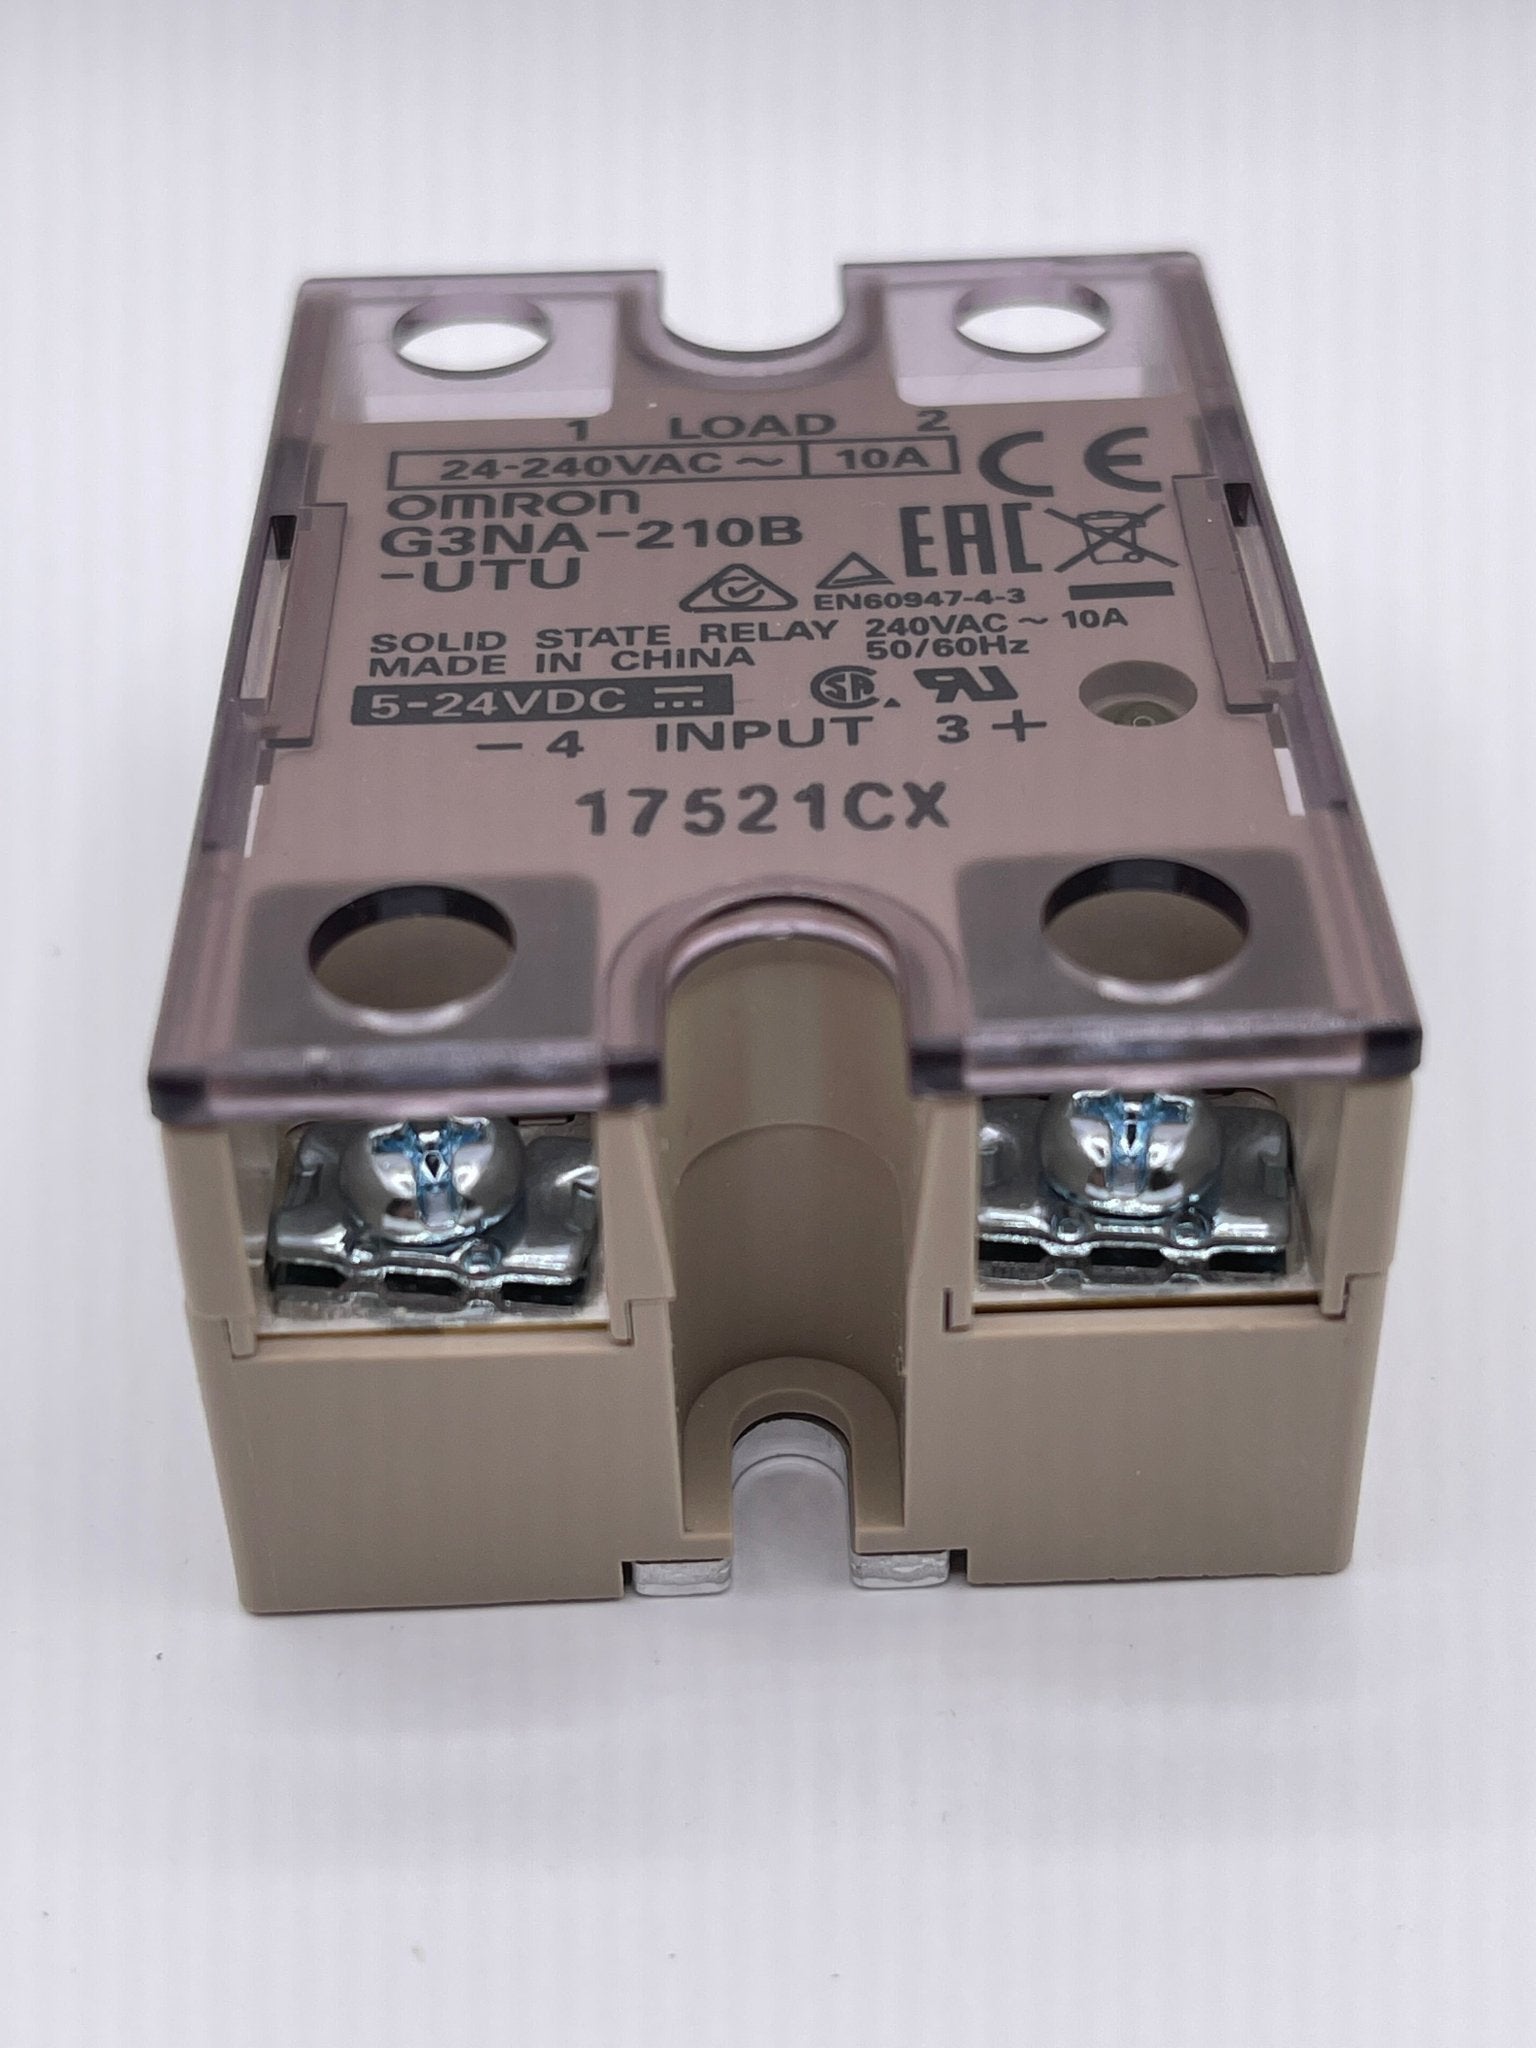 Omron G3NA-225B DC5-24 Solid State Relay, Zero Cross Function, Yellow  Indicator, Phototriac Coupler Isolation, 25 A Rated Load Current, 24 to 240  VAC Rated Load Voltage, 5 to 24 VDC Input Voltage